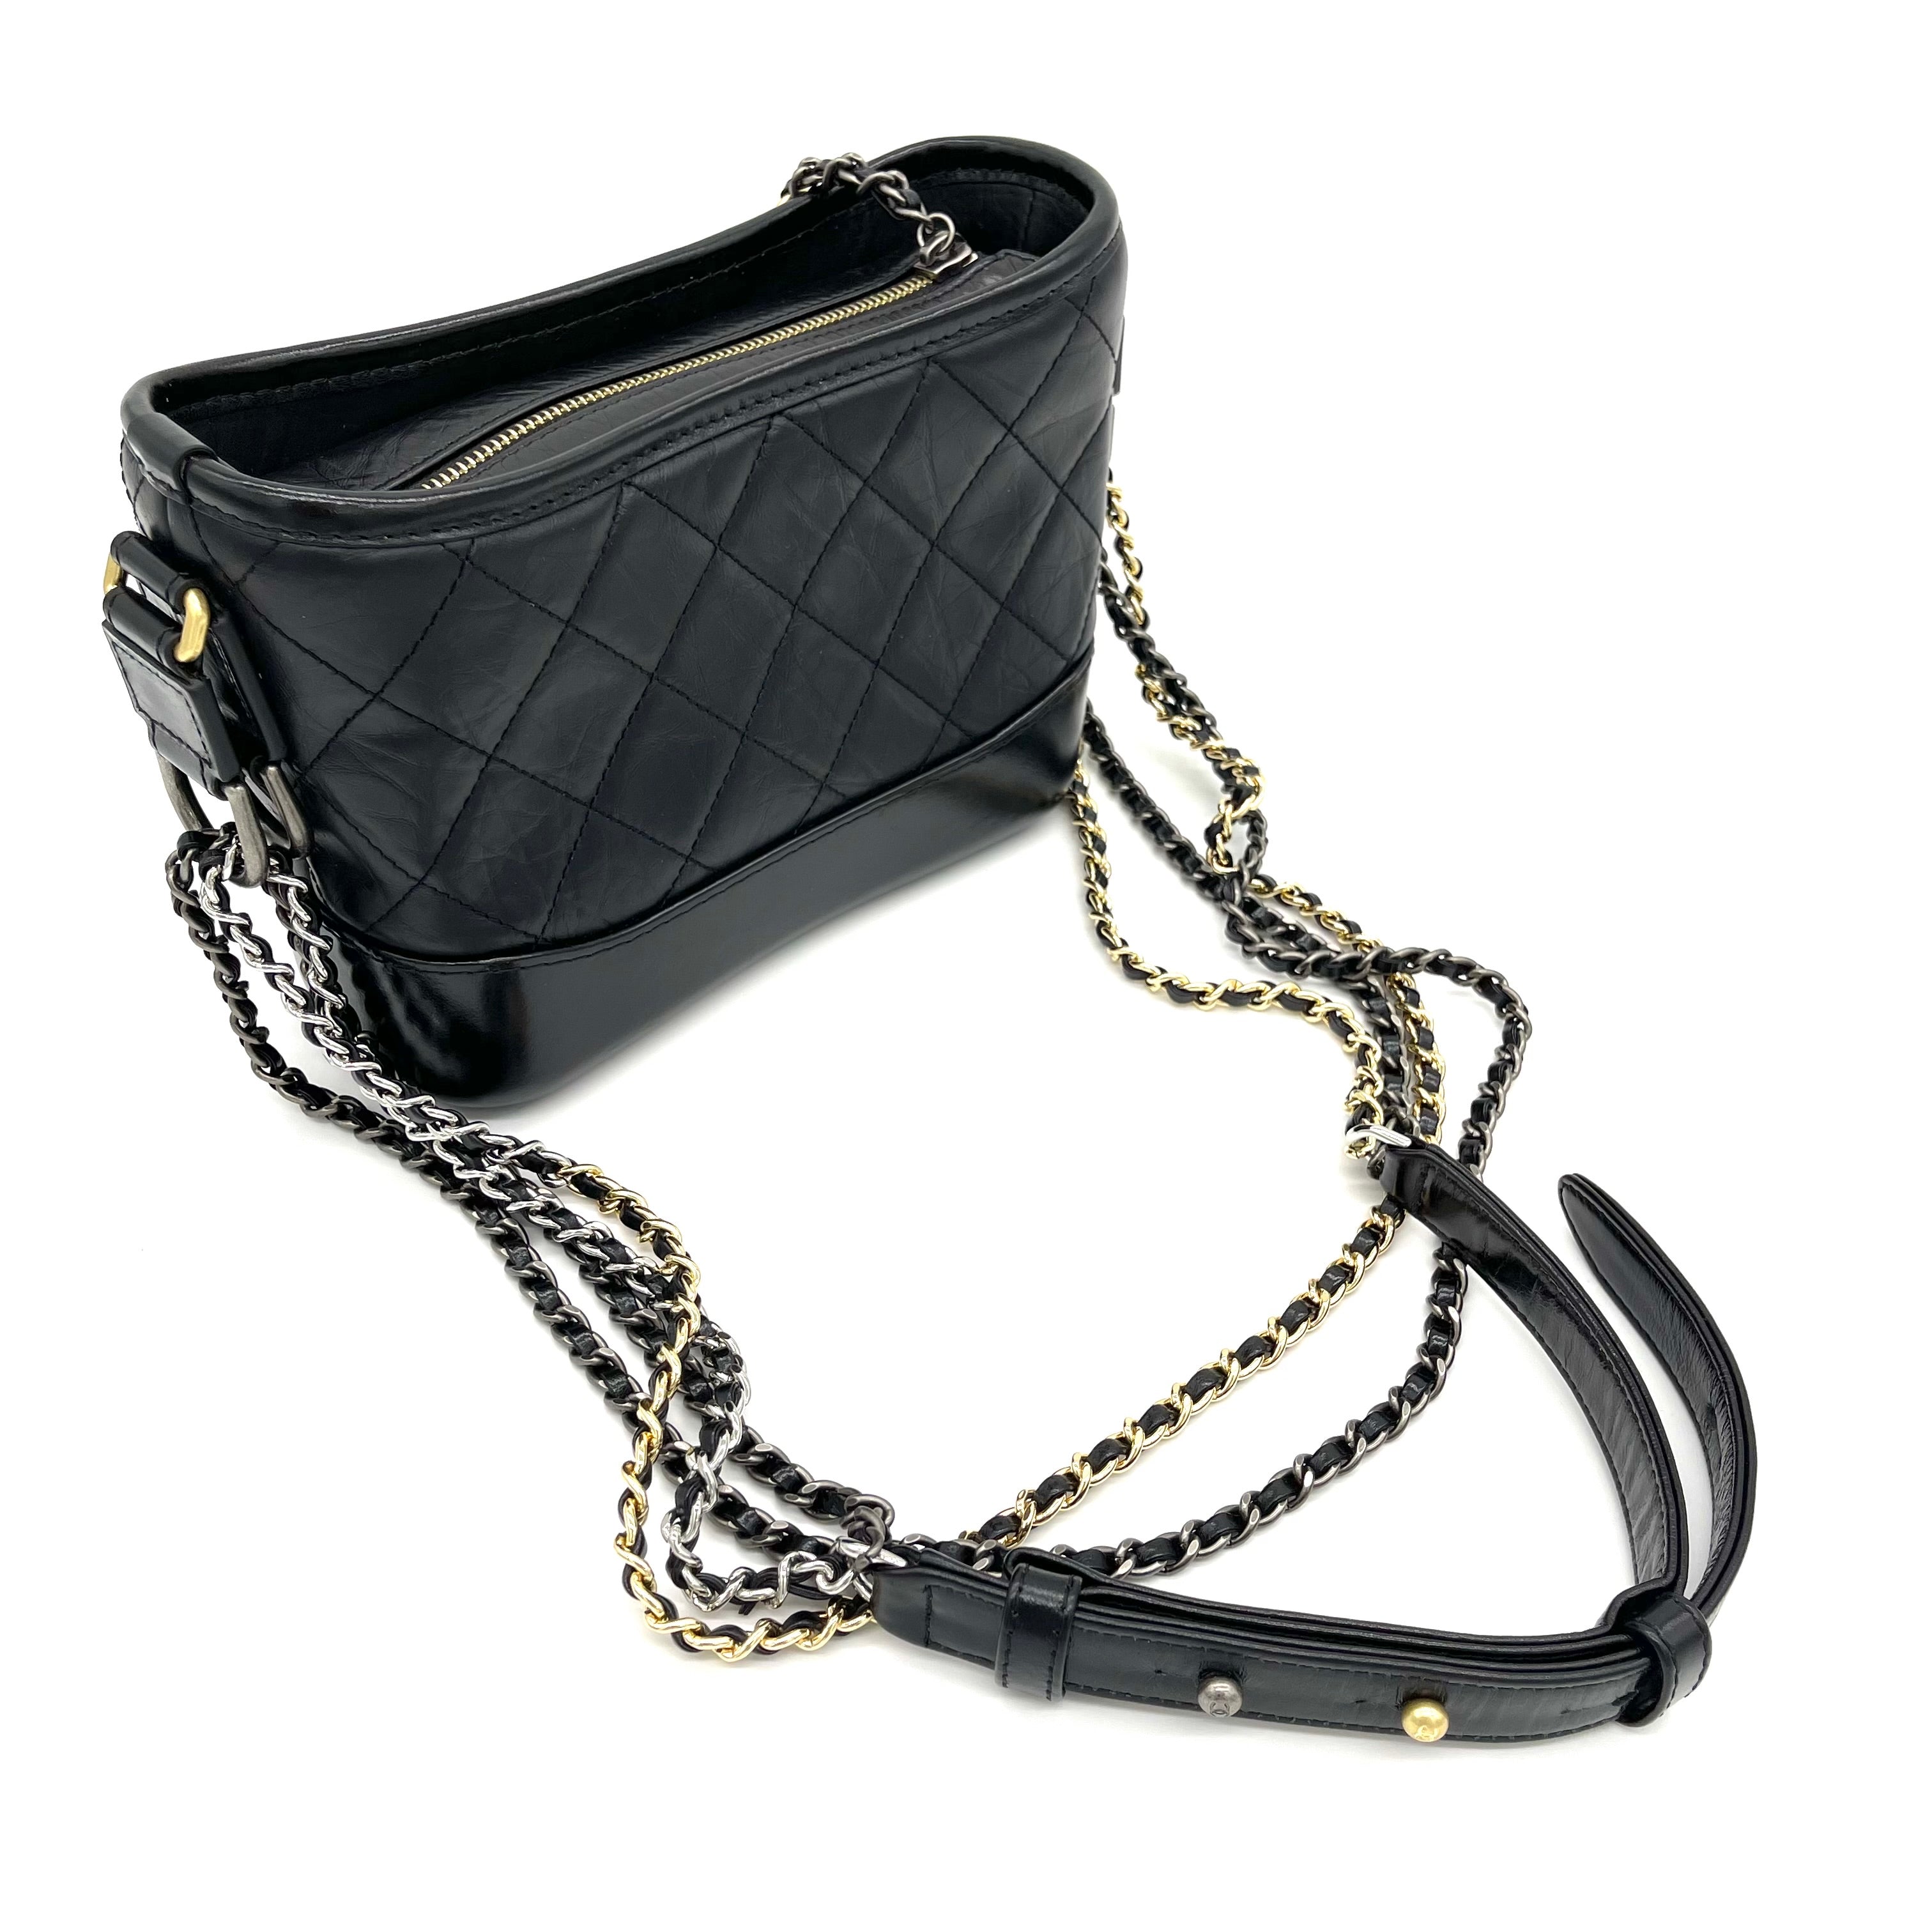 CHANEL Aged Calfskin Quilted Small Gabrielle Hobo Black